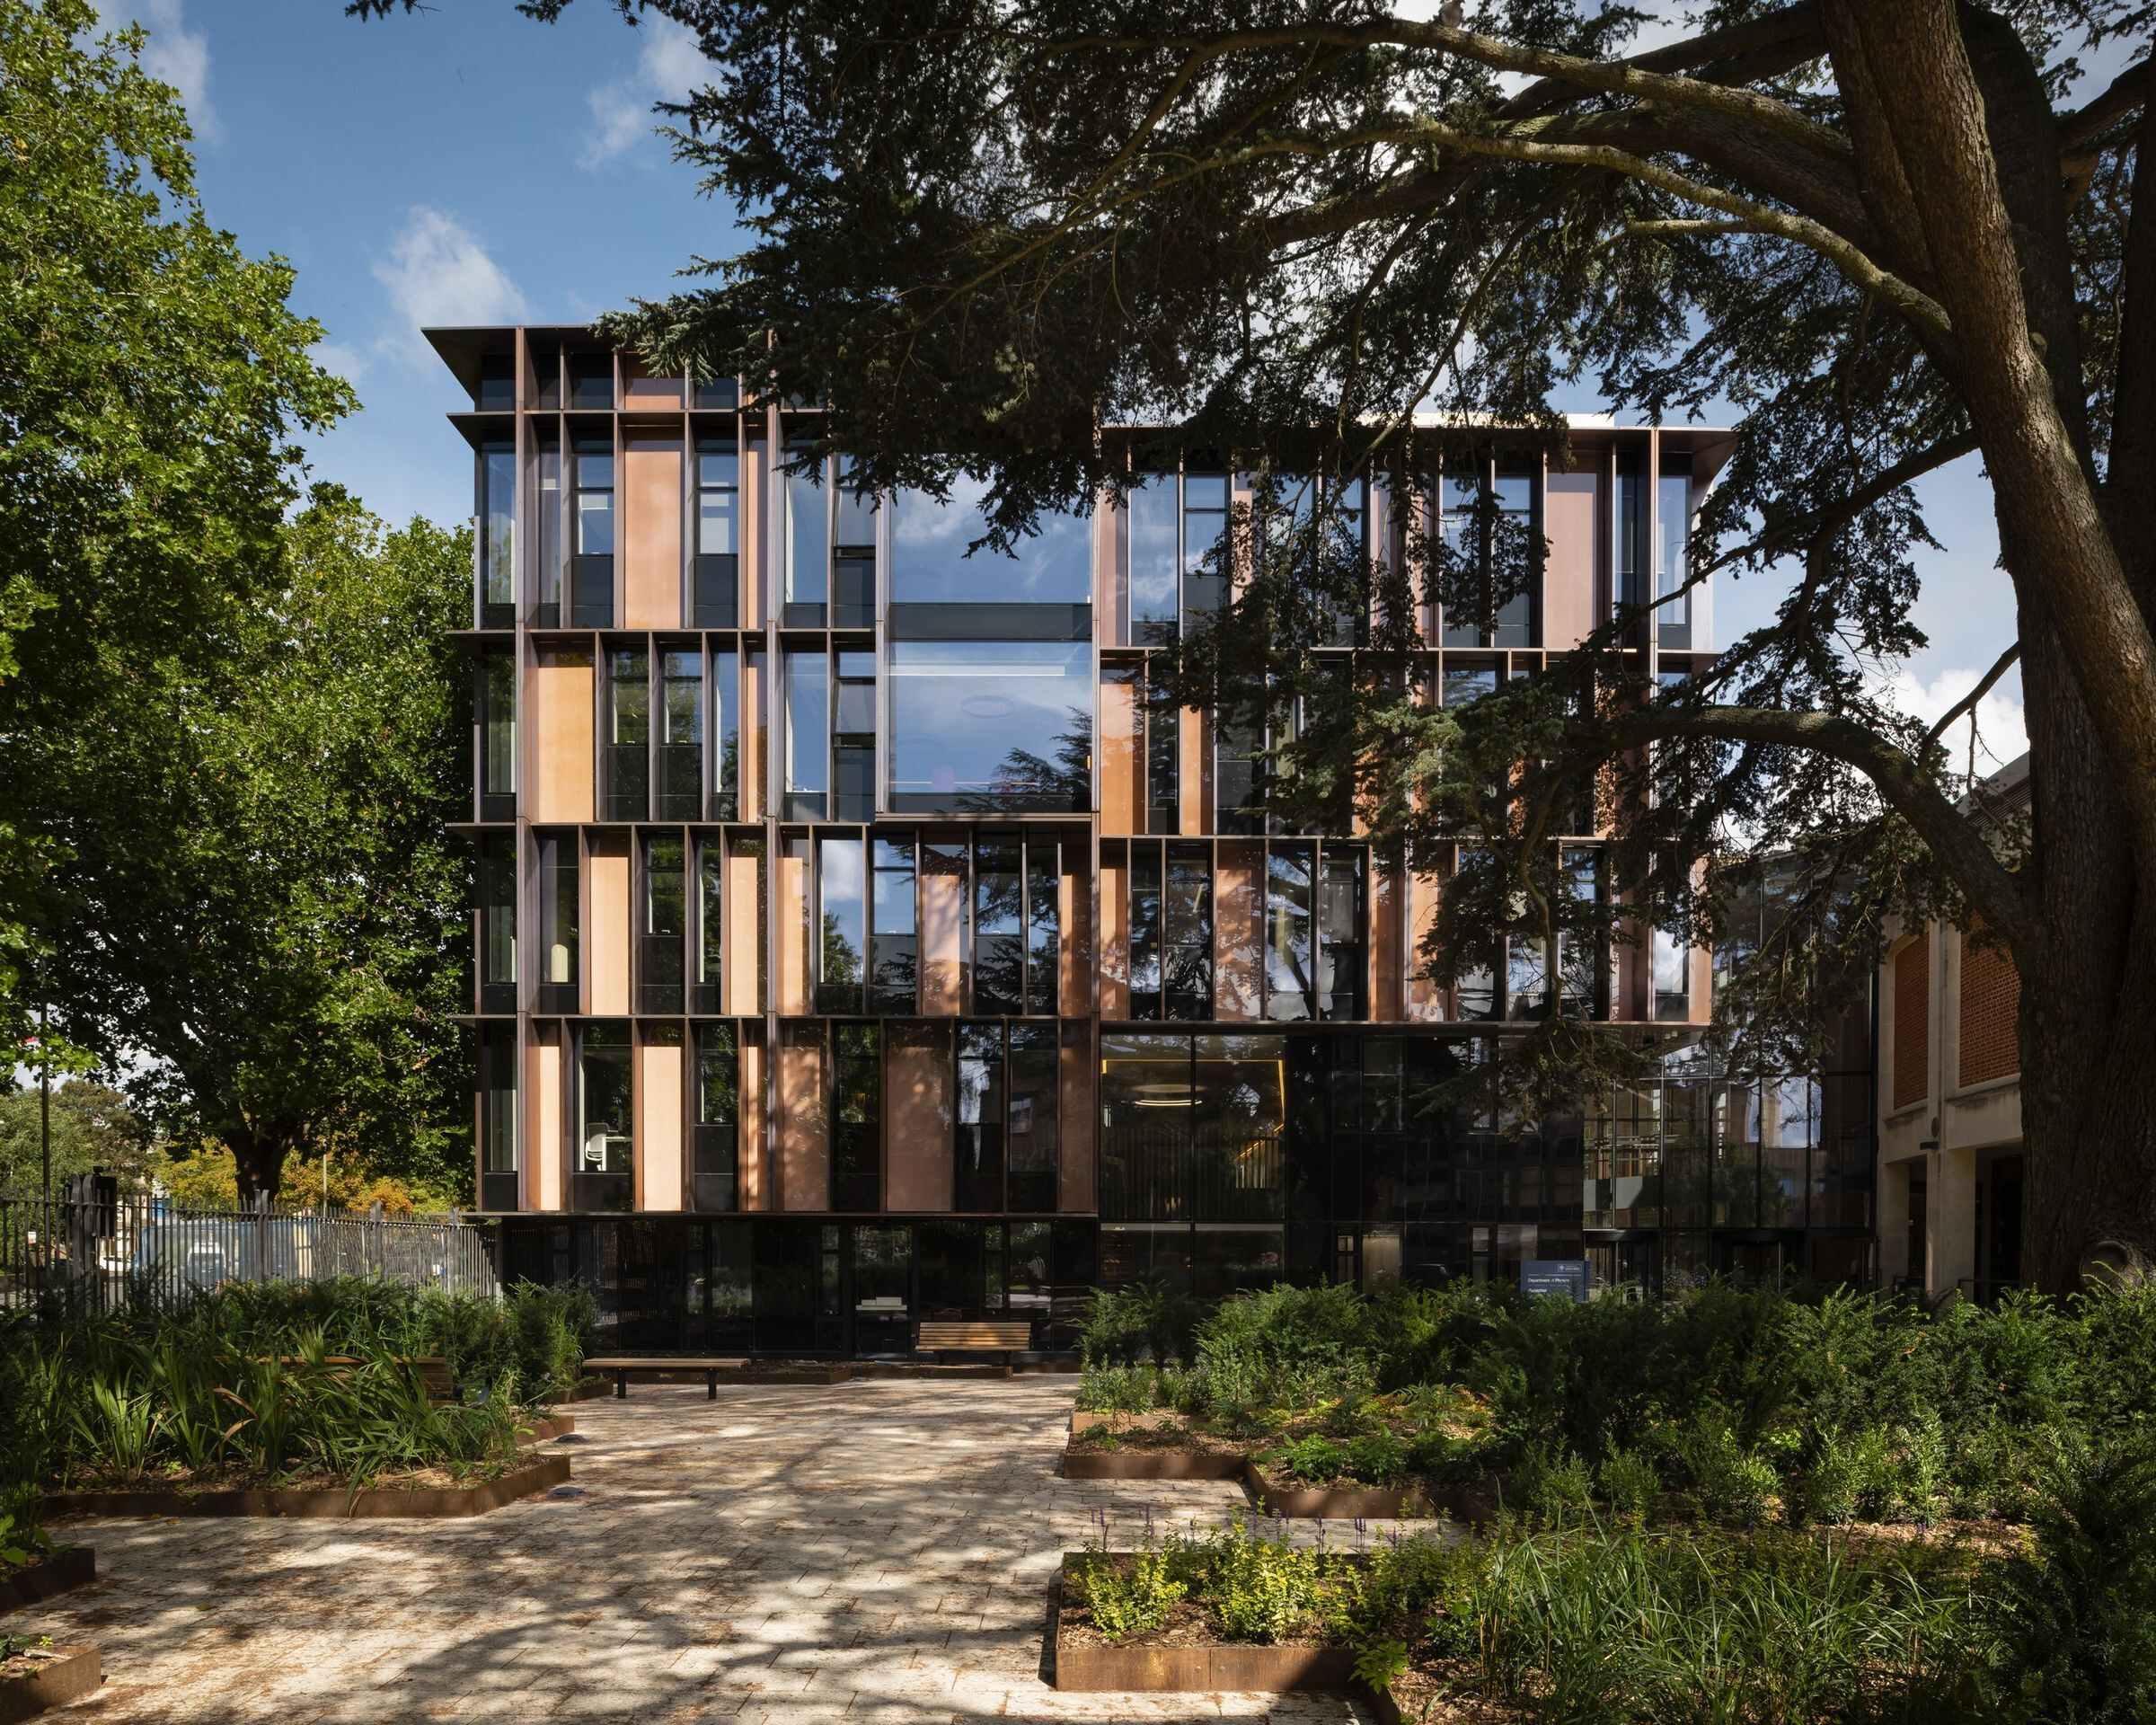 photo_credit photo : Jim Stephenson | project : The Beecroft Building for University of Oxford by Hawkins/Brown